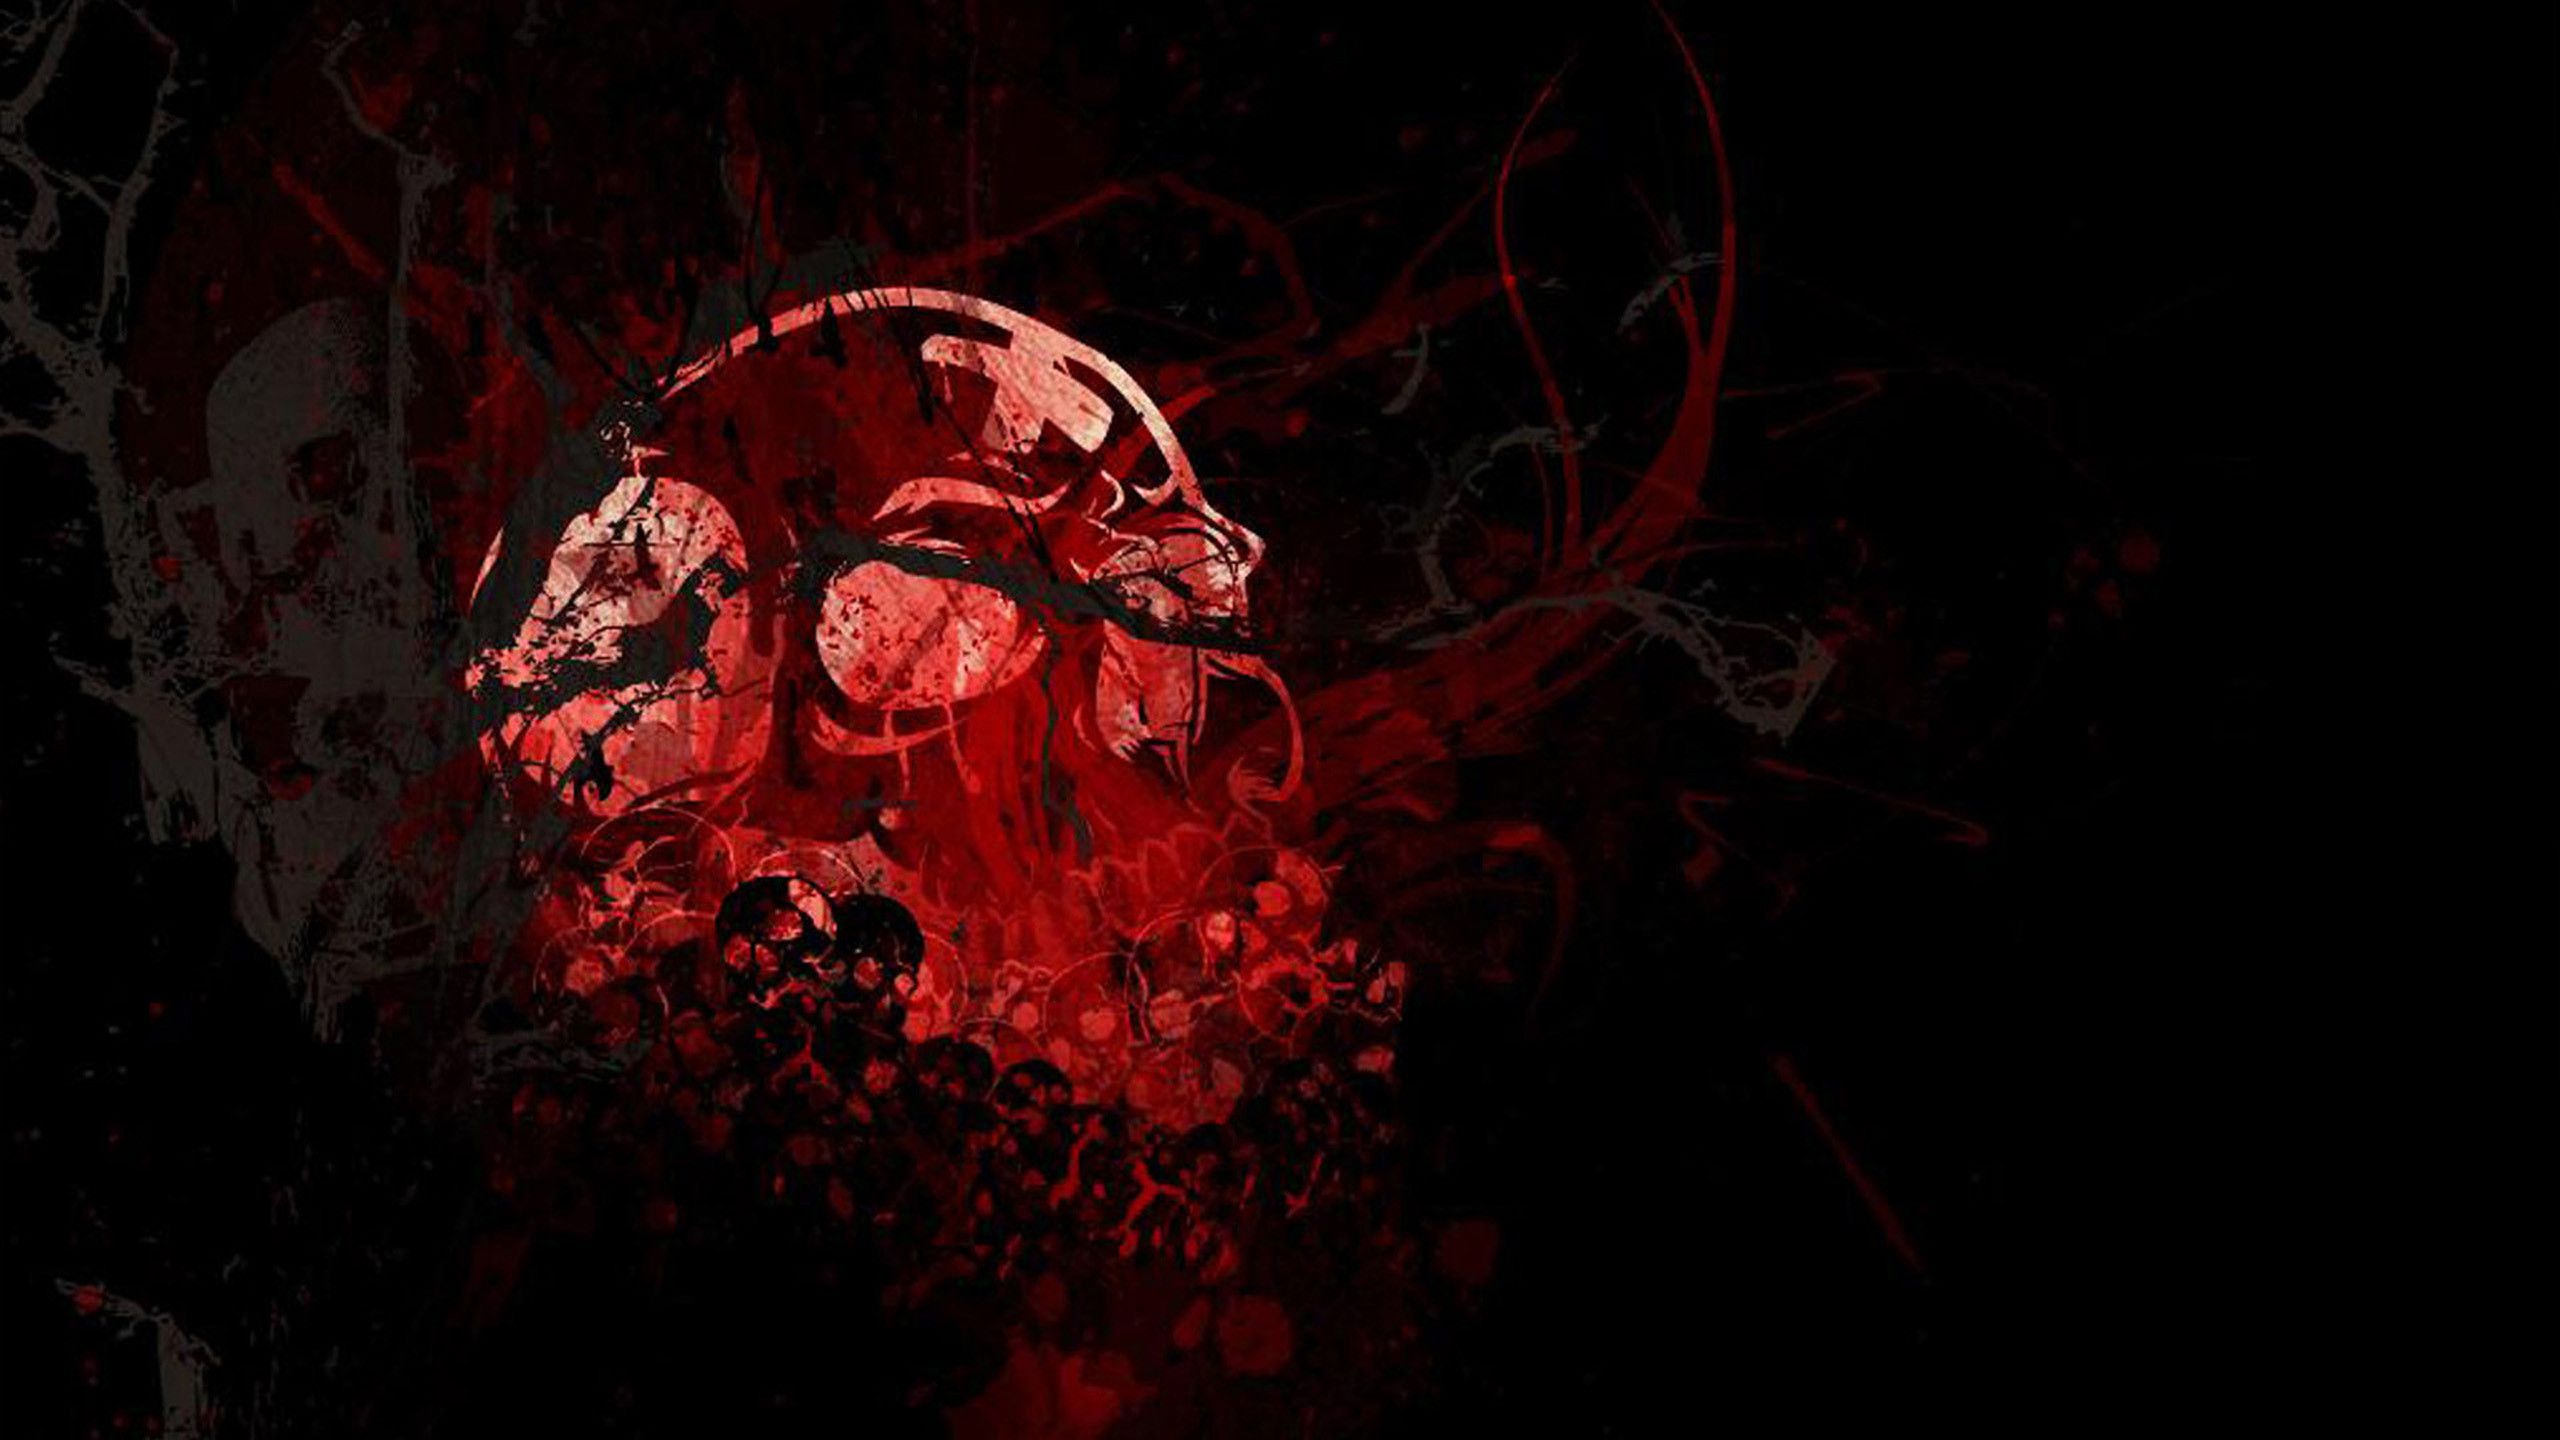 Black and Red Horror Wallpaper Free Black and Red Horror Background